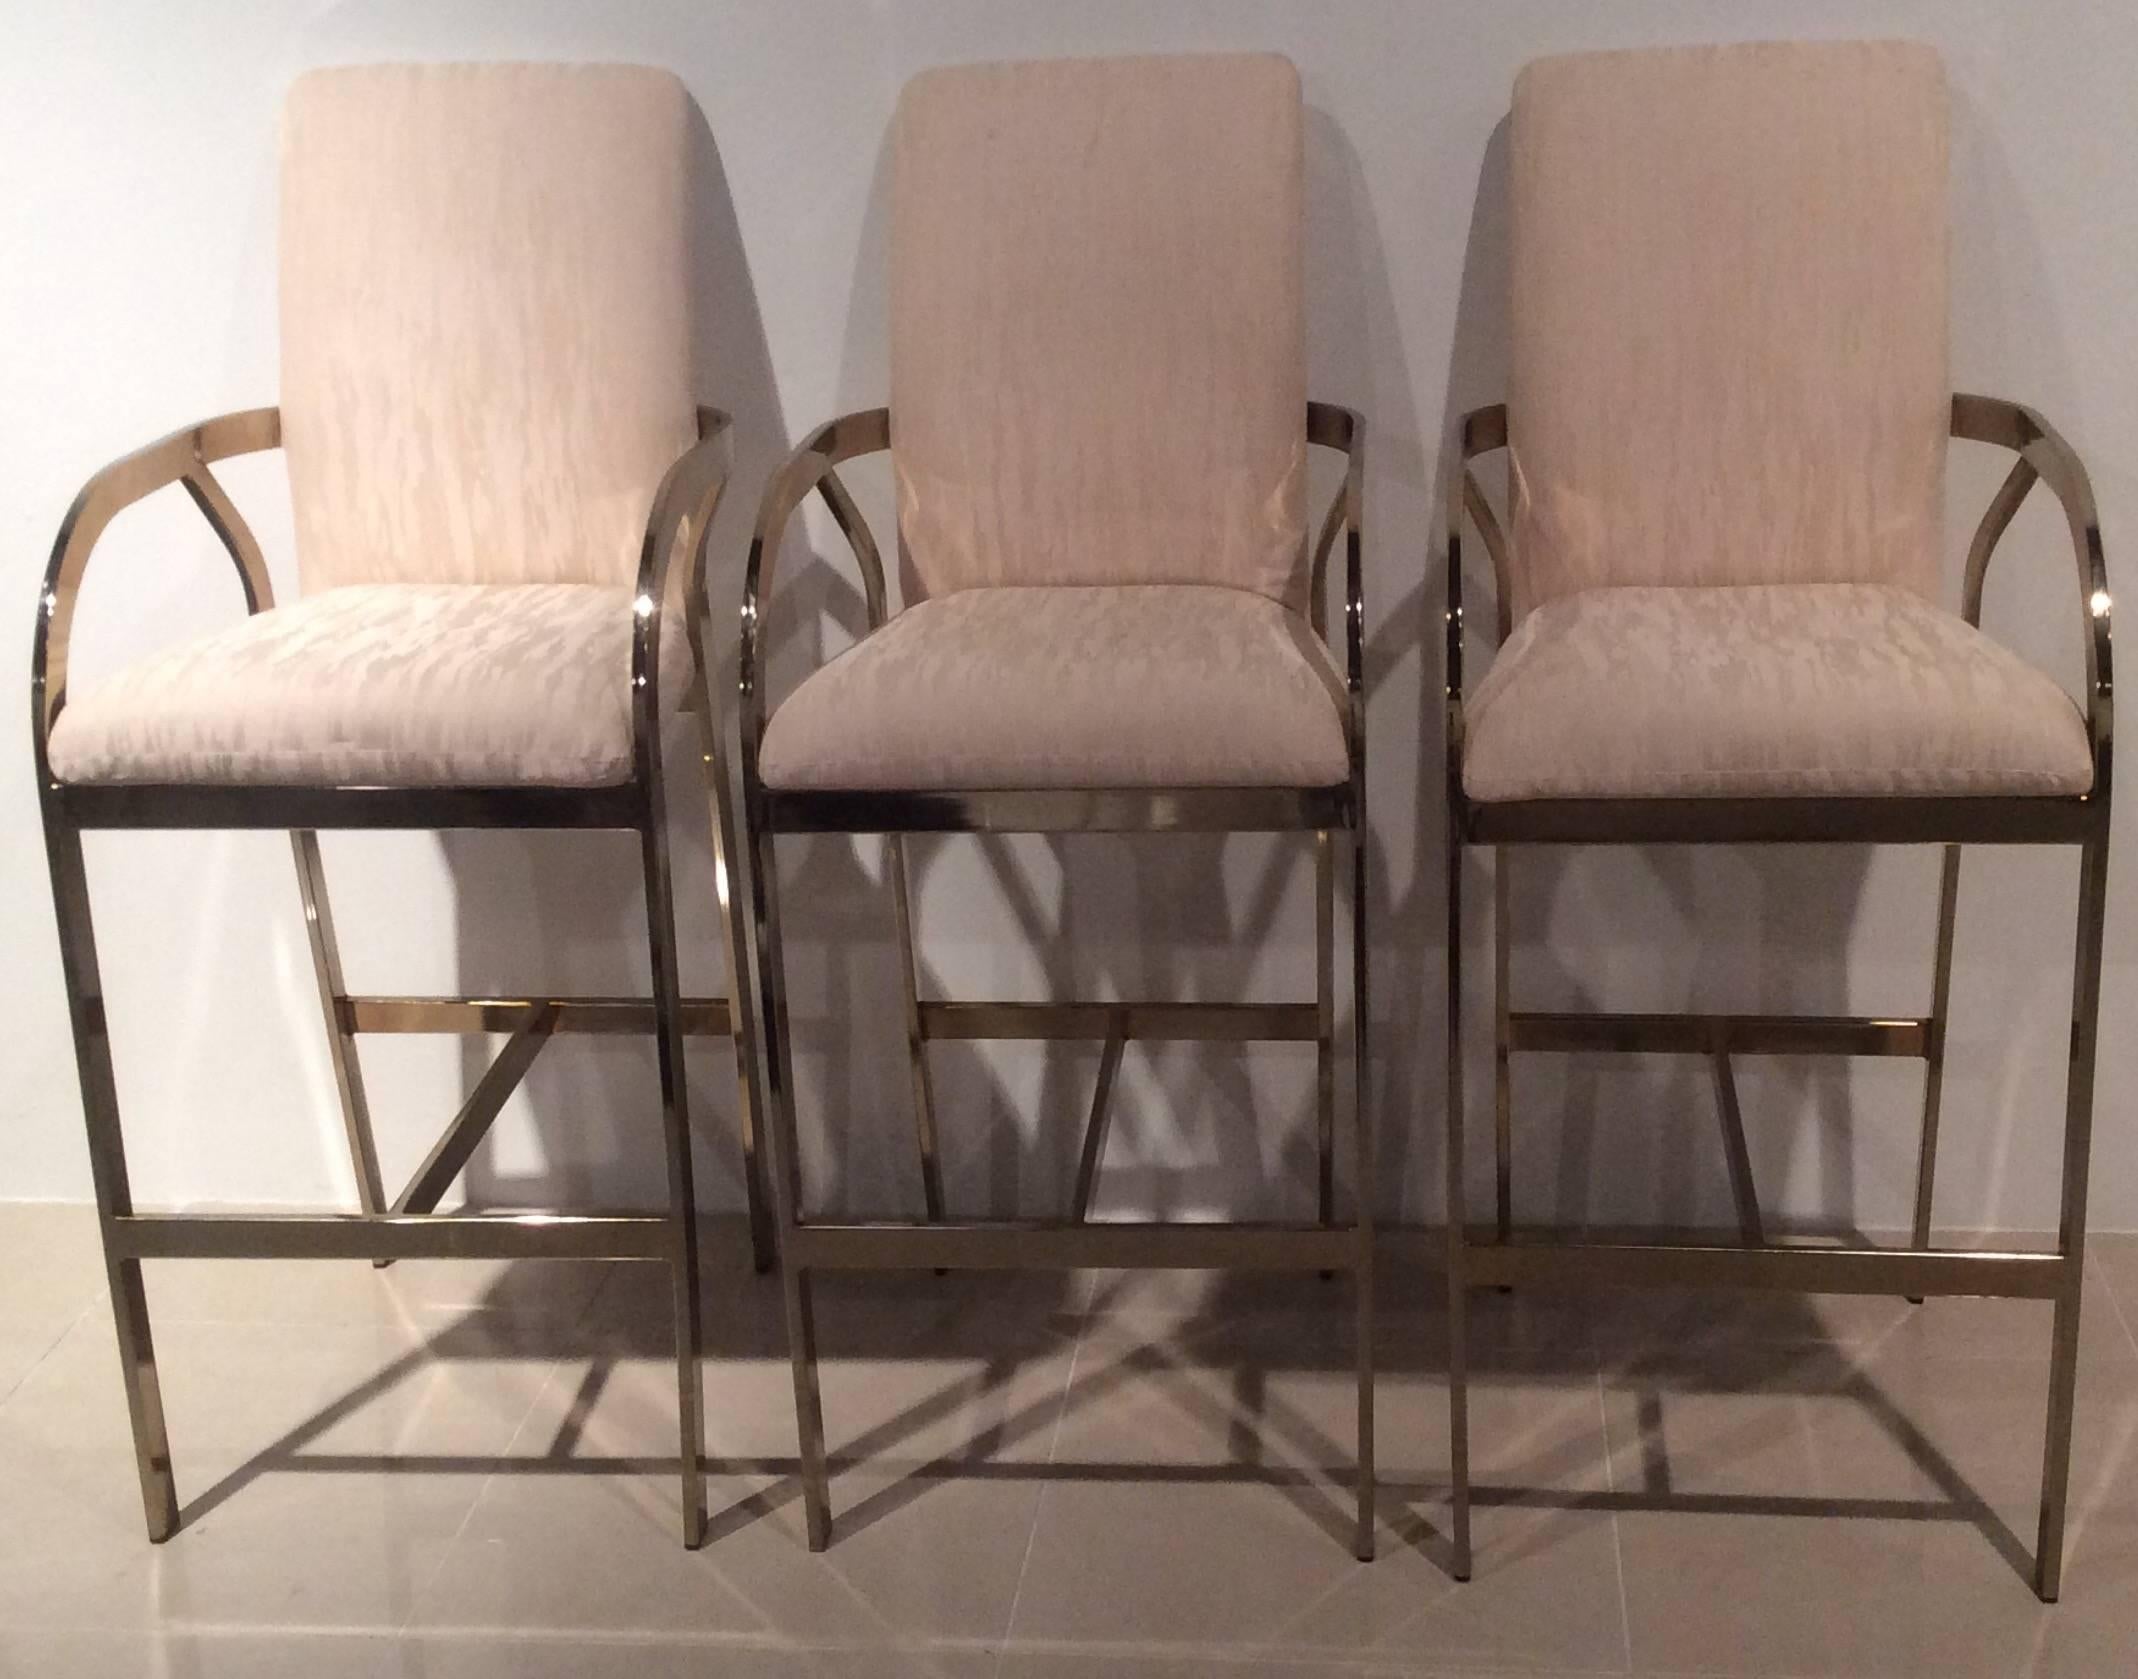 Amazing set of three (3) Hollywood Regency, vintage DIA, Design Institute of America, gold brass barstools with arms. These have their original upholstery which will need to be newly upholstered. There is one small area which is pictured that has